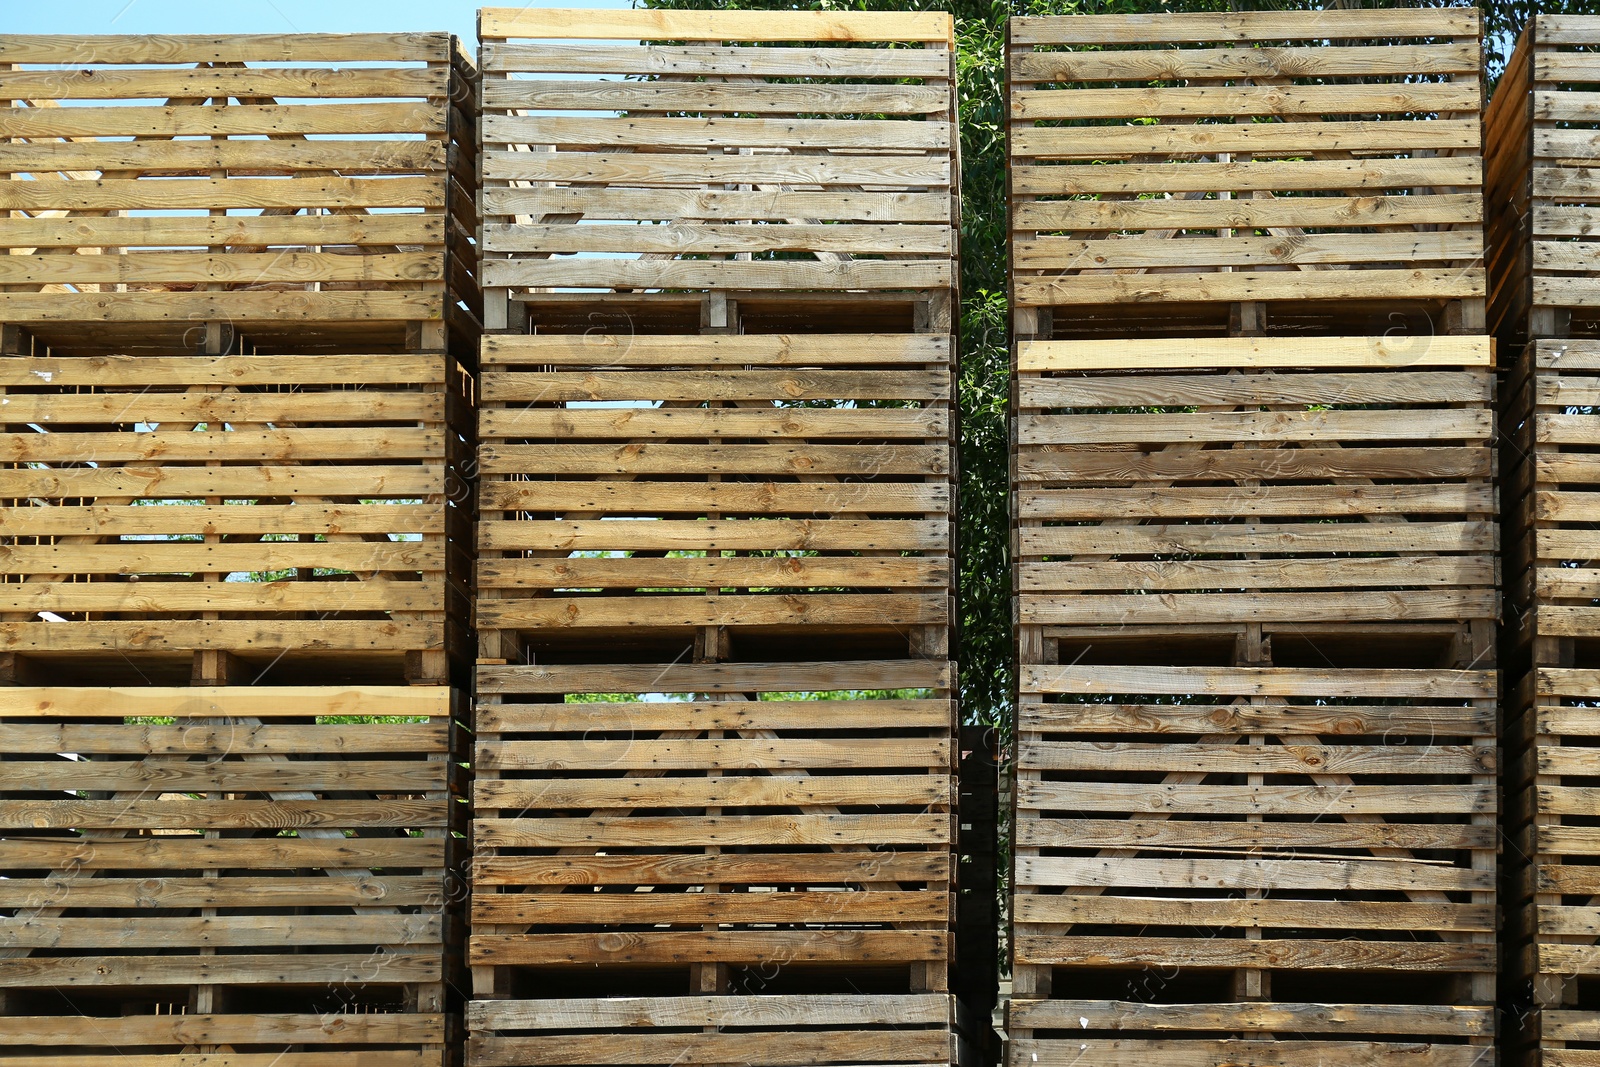 Photo of Pile of empty wooden crates outdoors on sunny day